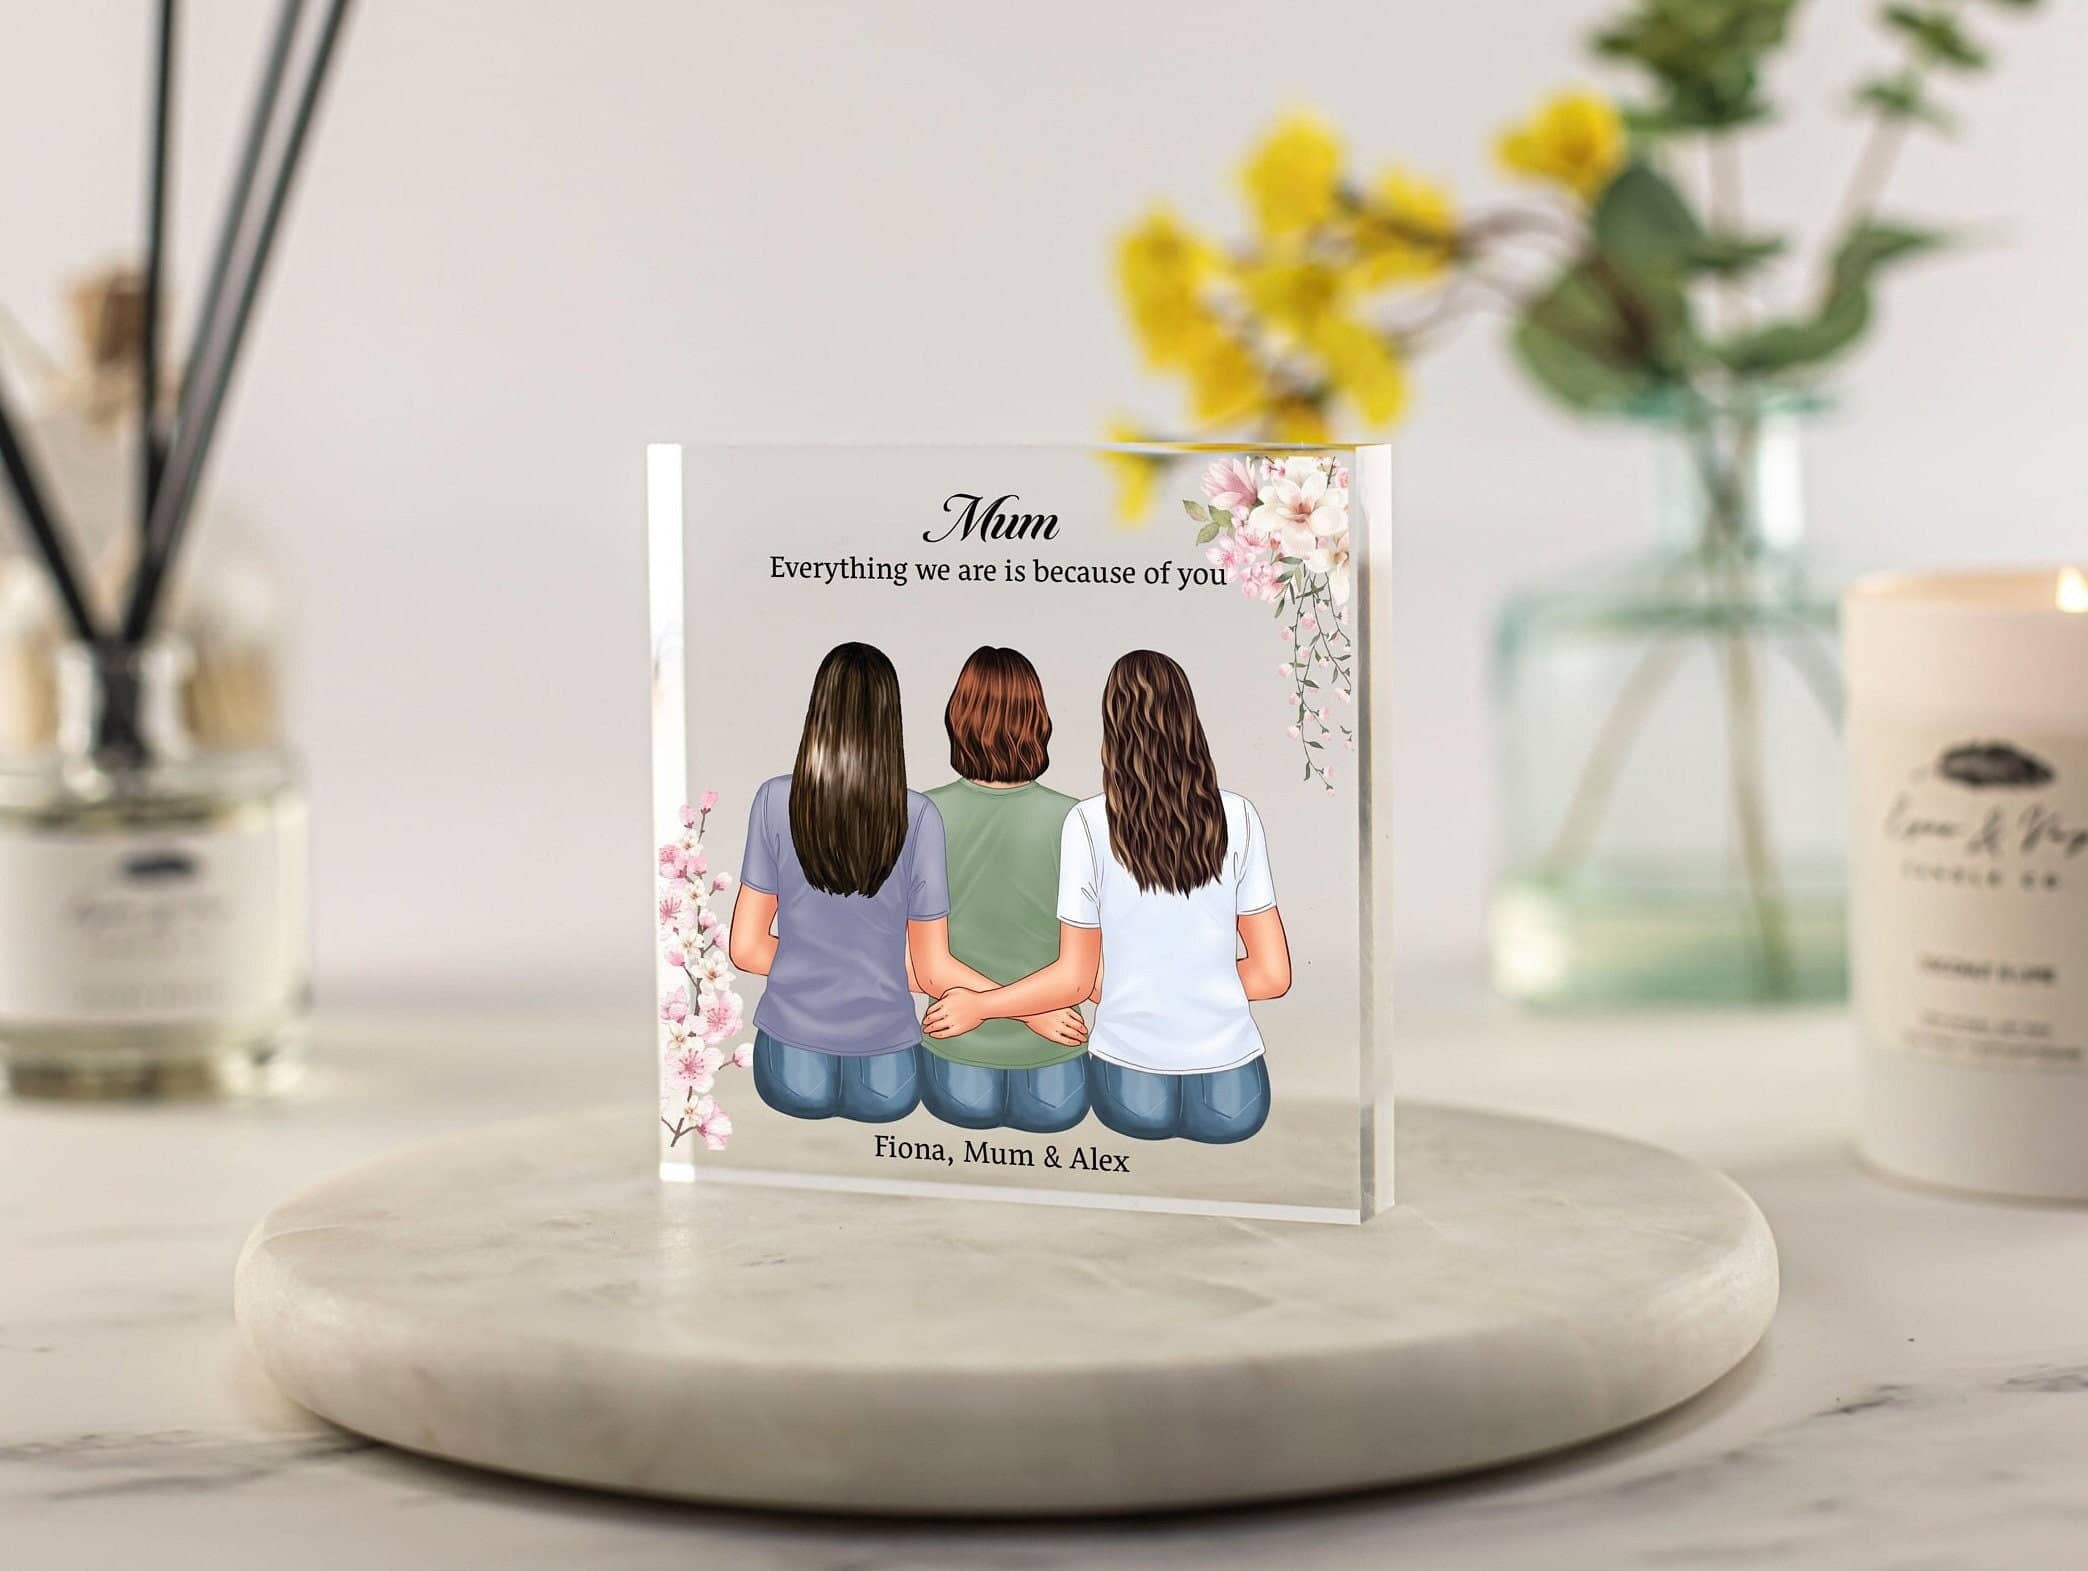 Personalised Mum Print frame, Mothers day gift from daughters, Mum birthday gift, 50th birthday, 60th birthday present, Custom portrait acrylic plaque floral flowers print